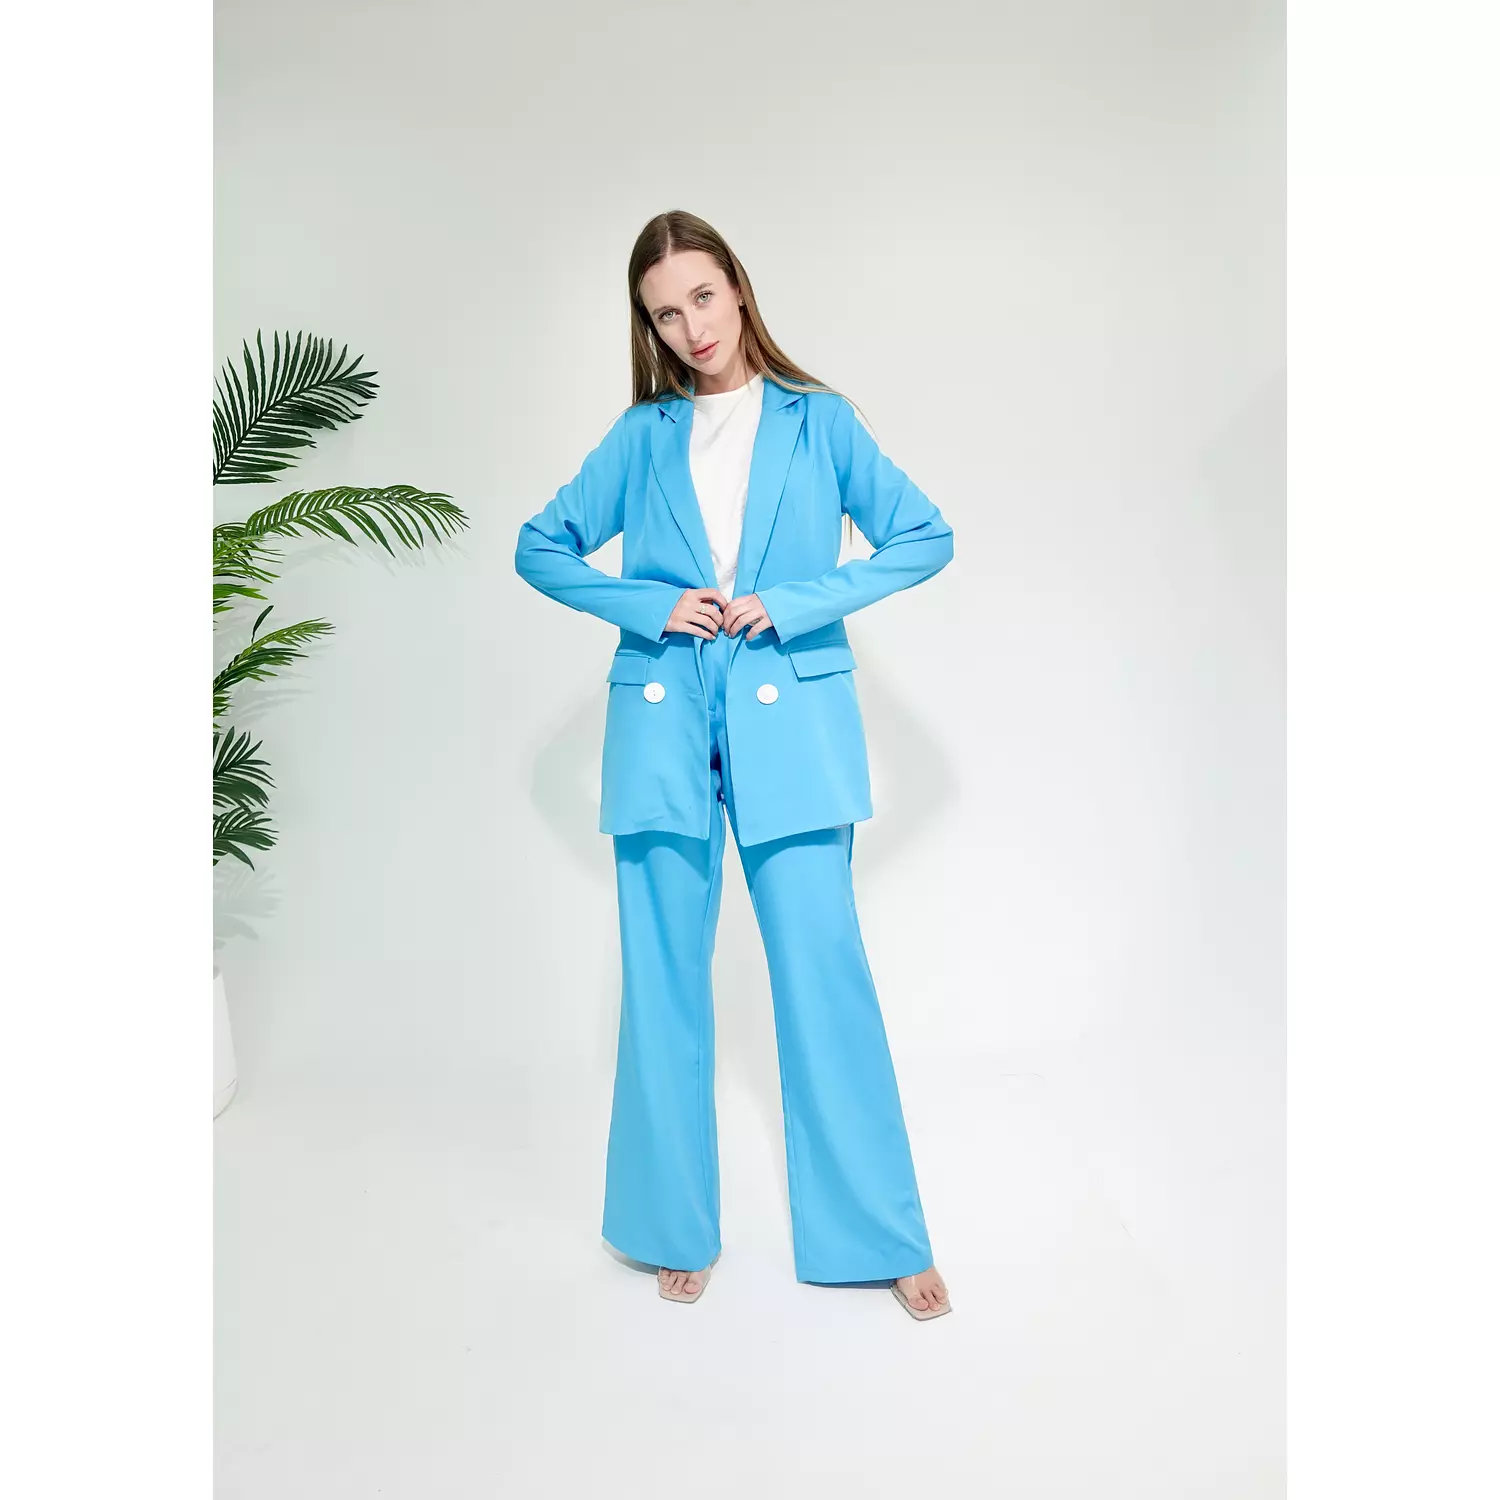 TURQUOISE SUIT 4